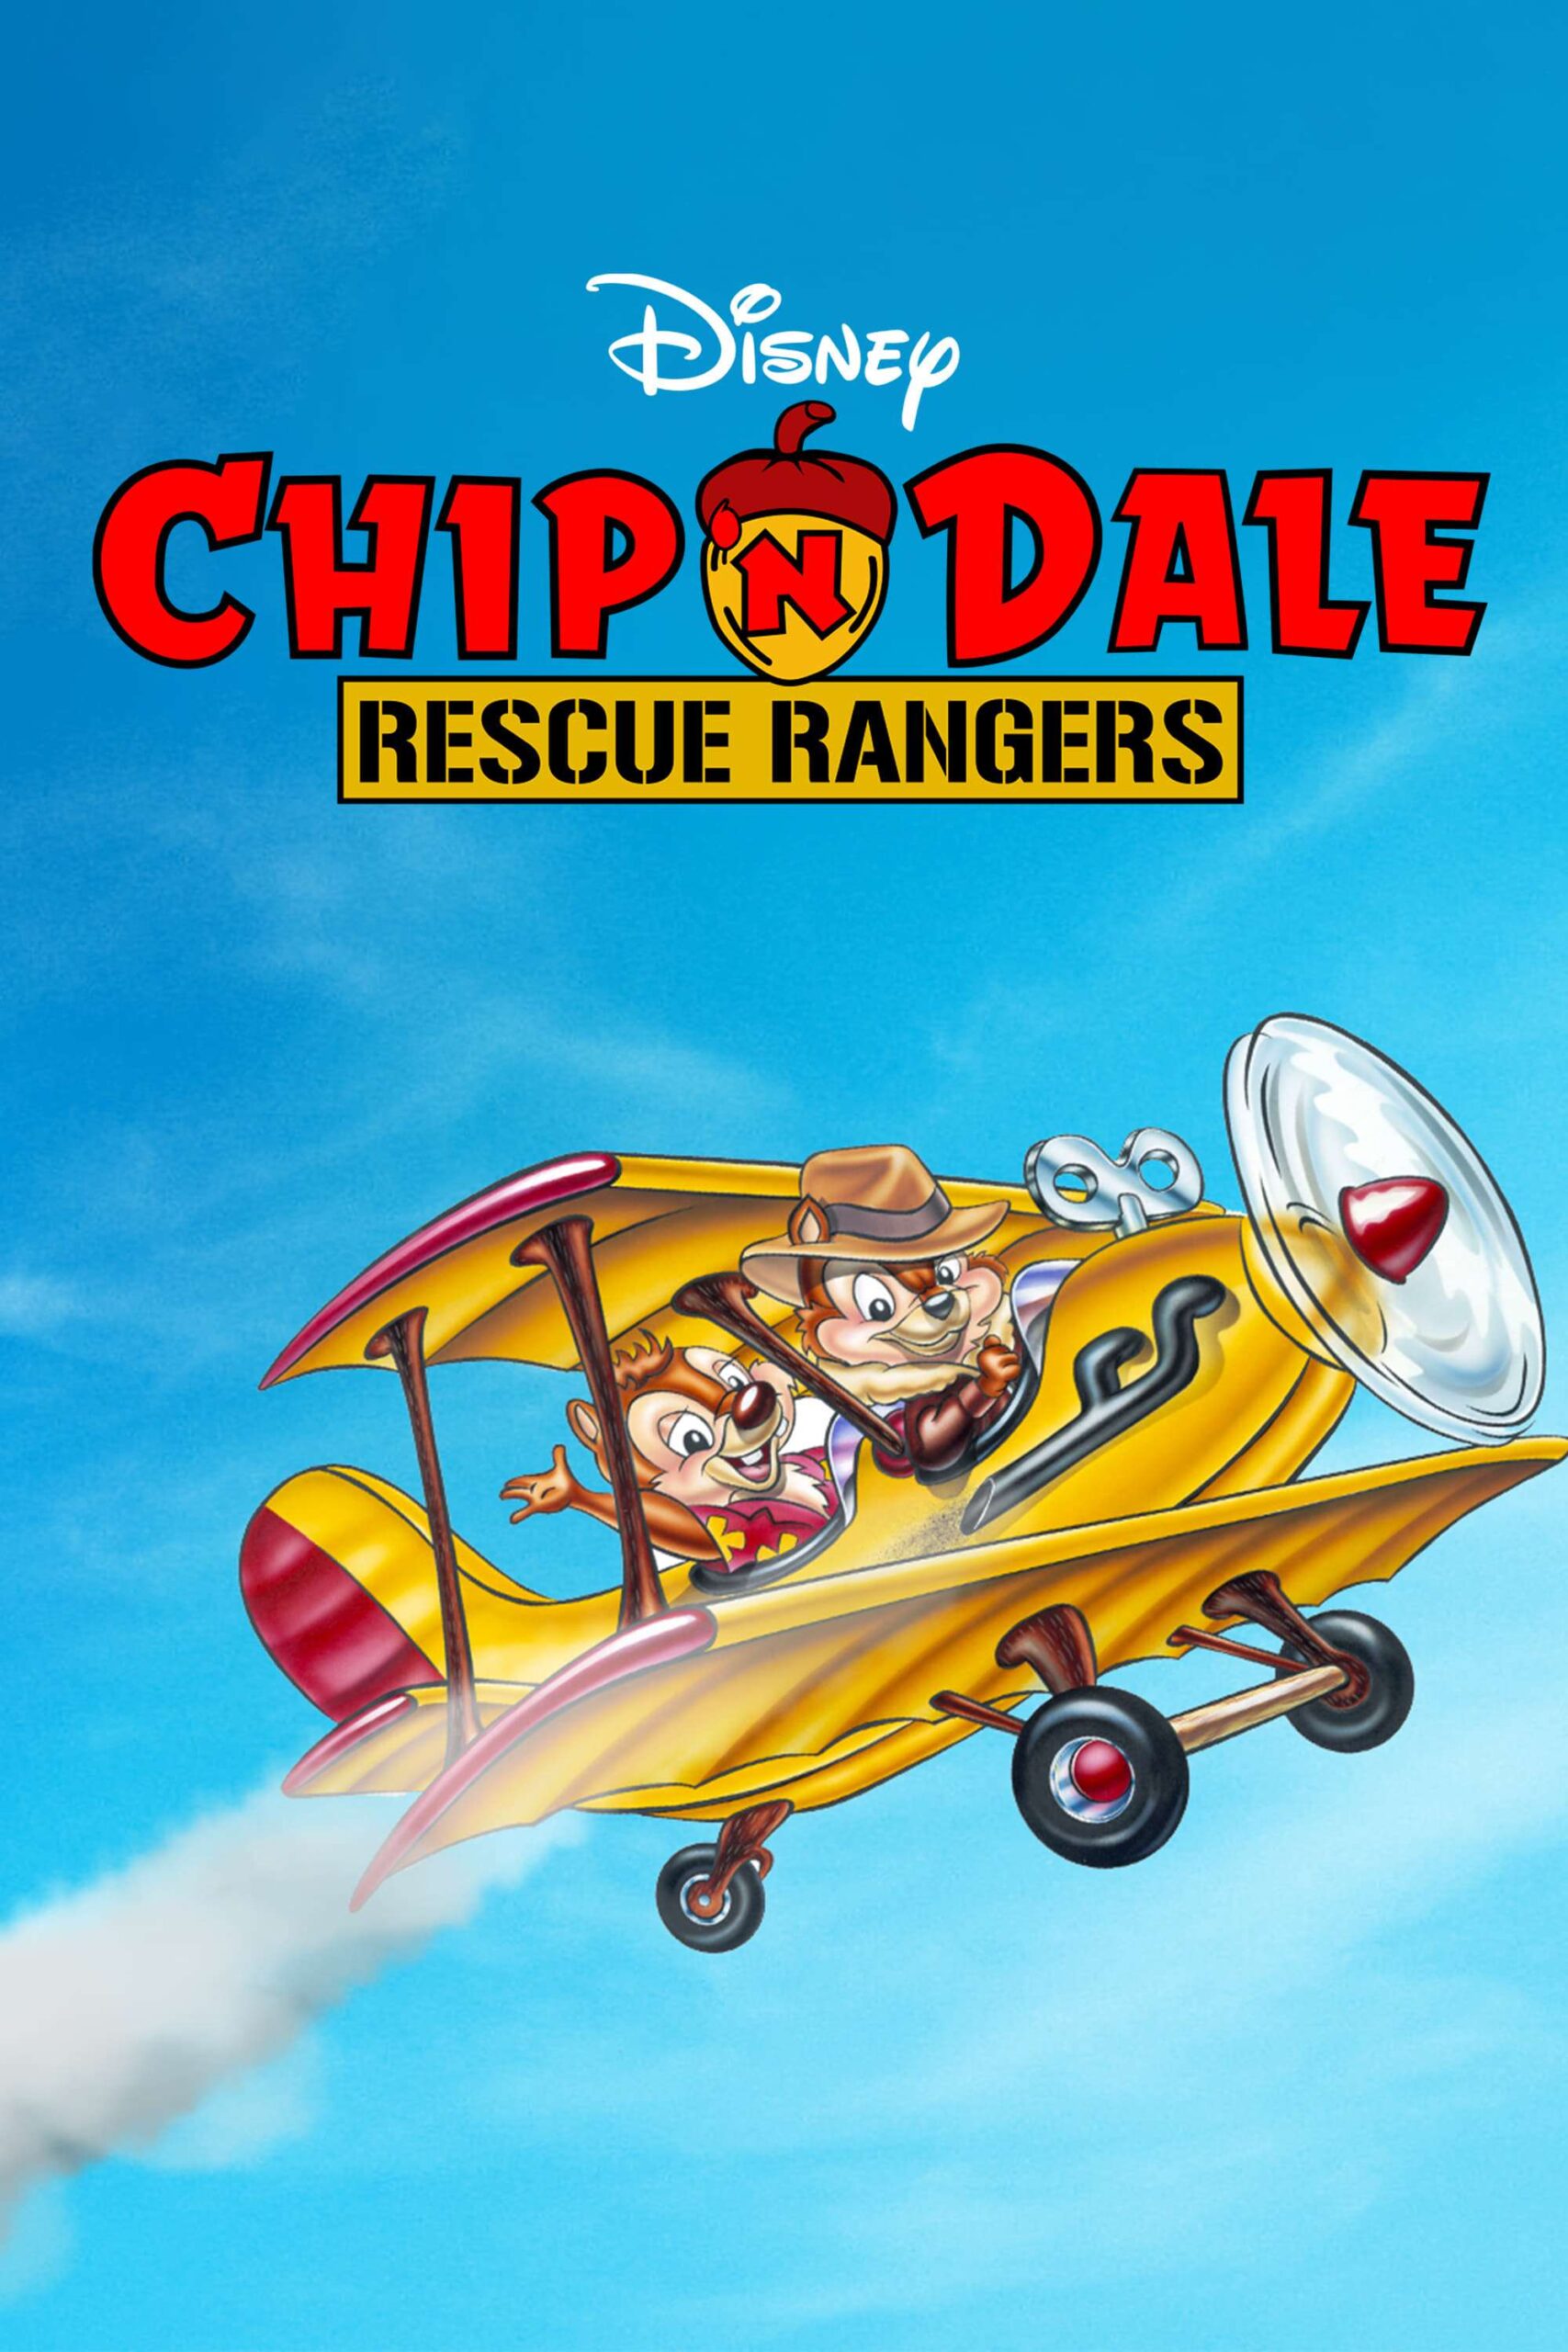 Chip ‘n Dale Rescue Rangers (1988)